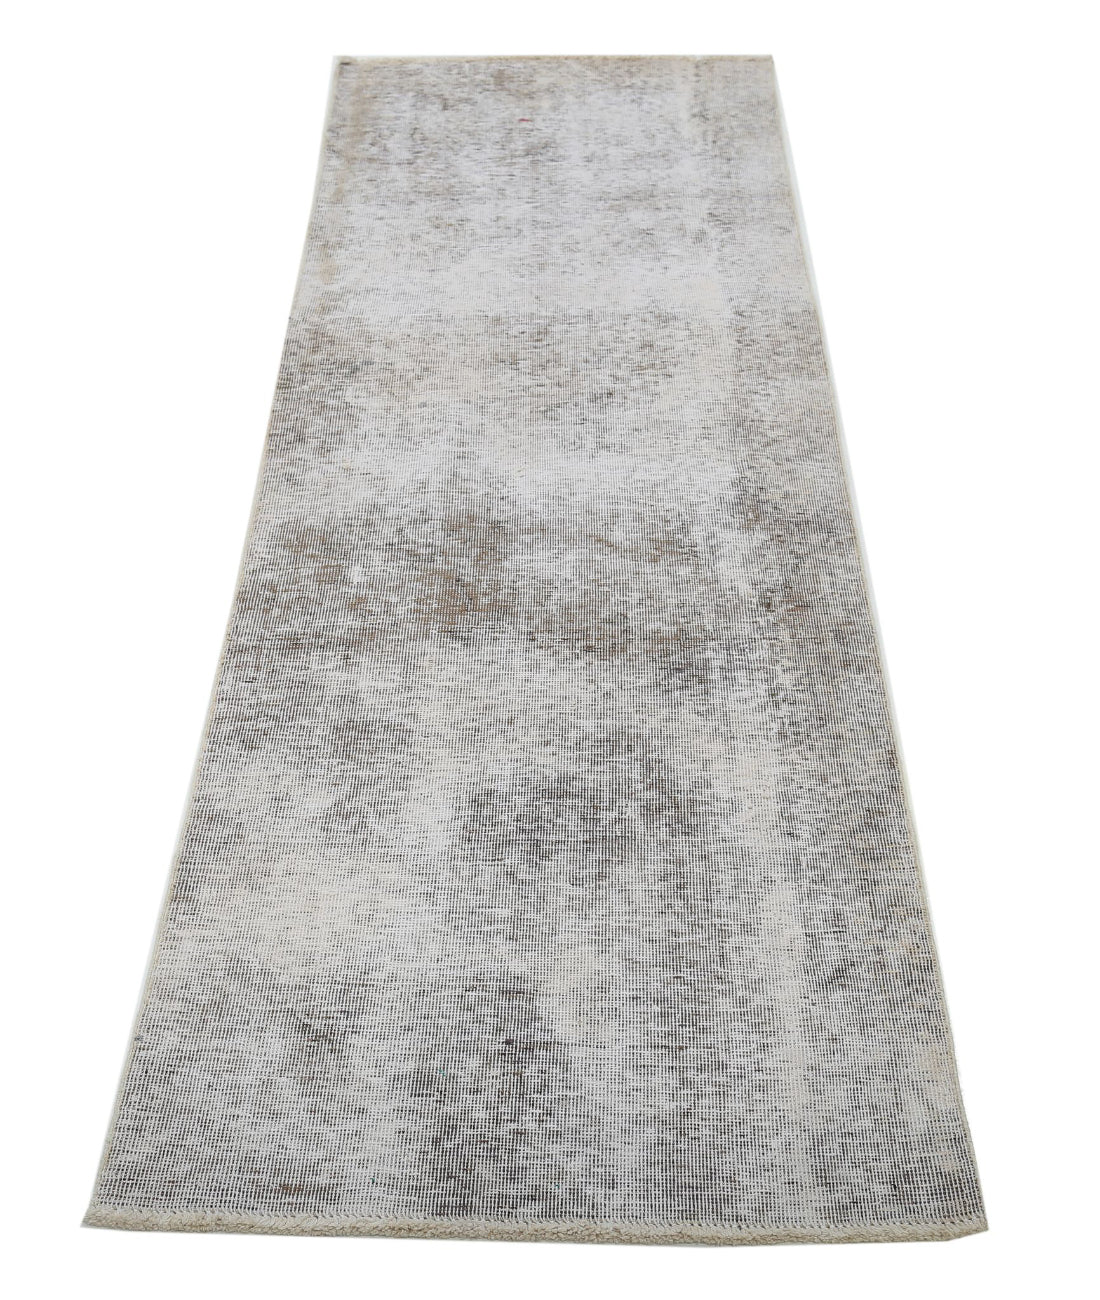 Hand Knotted Vintage Persian Tabriz Wool Rug - 2'4'' x 6'10'' 2'4'' x 6'10'' (70 X 205) / Grey / Ivory